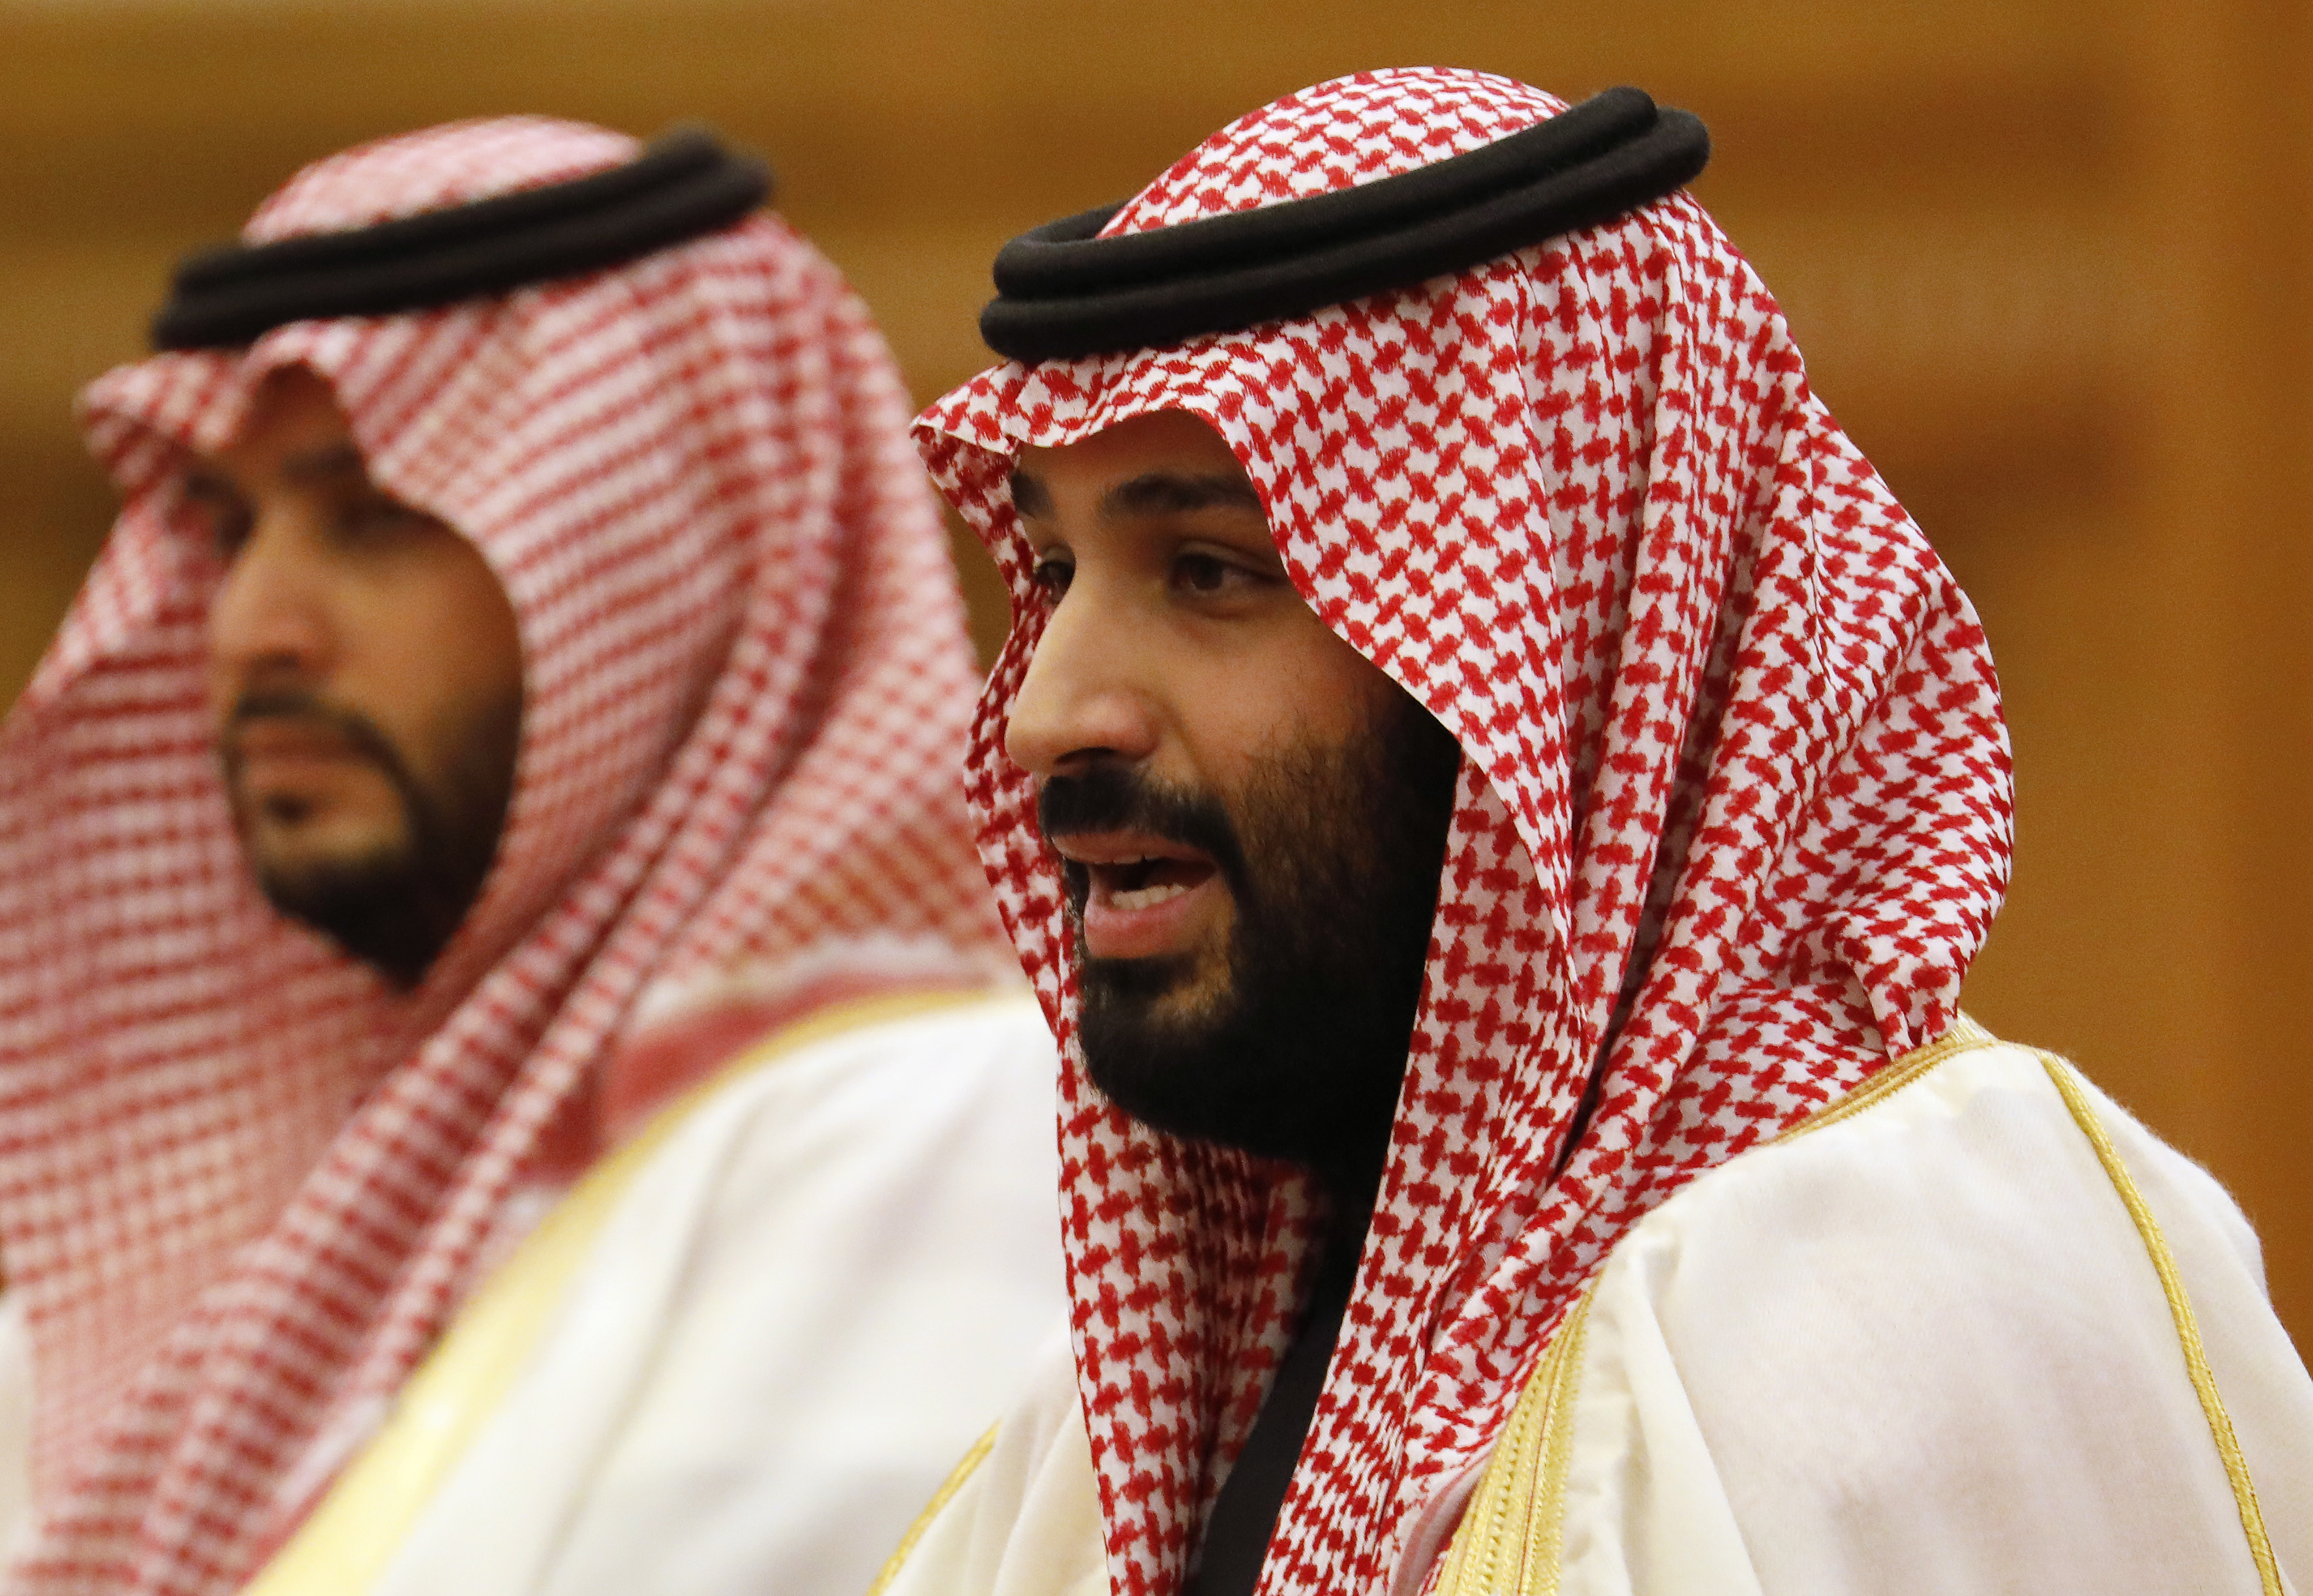 Saudi Crown Prince Mohammed bin Salman (R) attends a meeting with Chinese President Xi Jinping (not pictured) at the Great Hall of the People in Beijing on February 22, 2019.(HOW HWEE YOUNG/AFP/Getty Images)